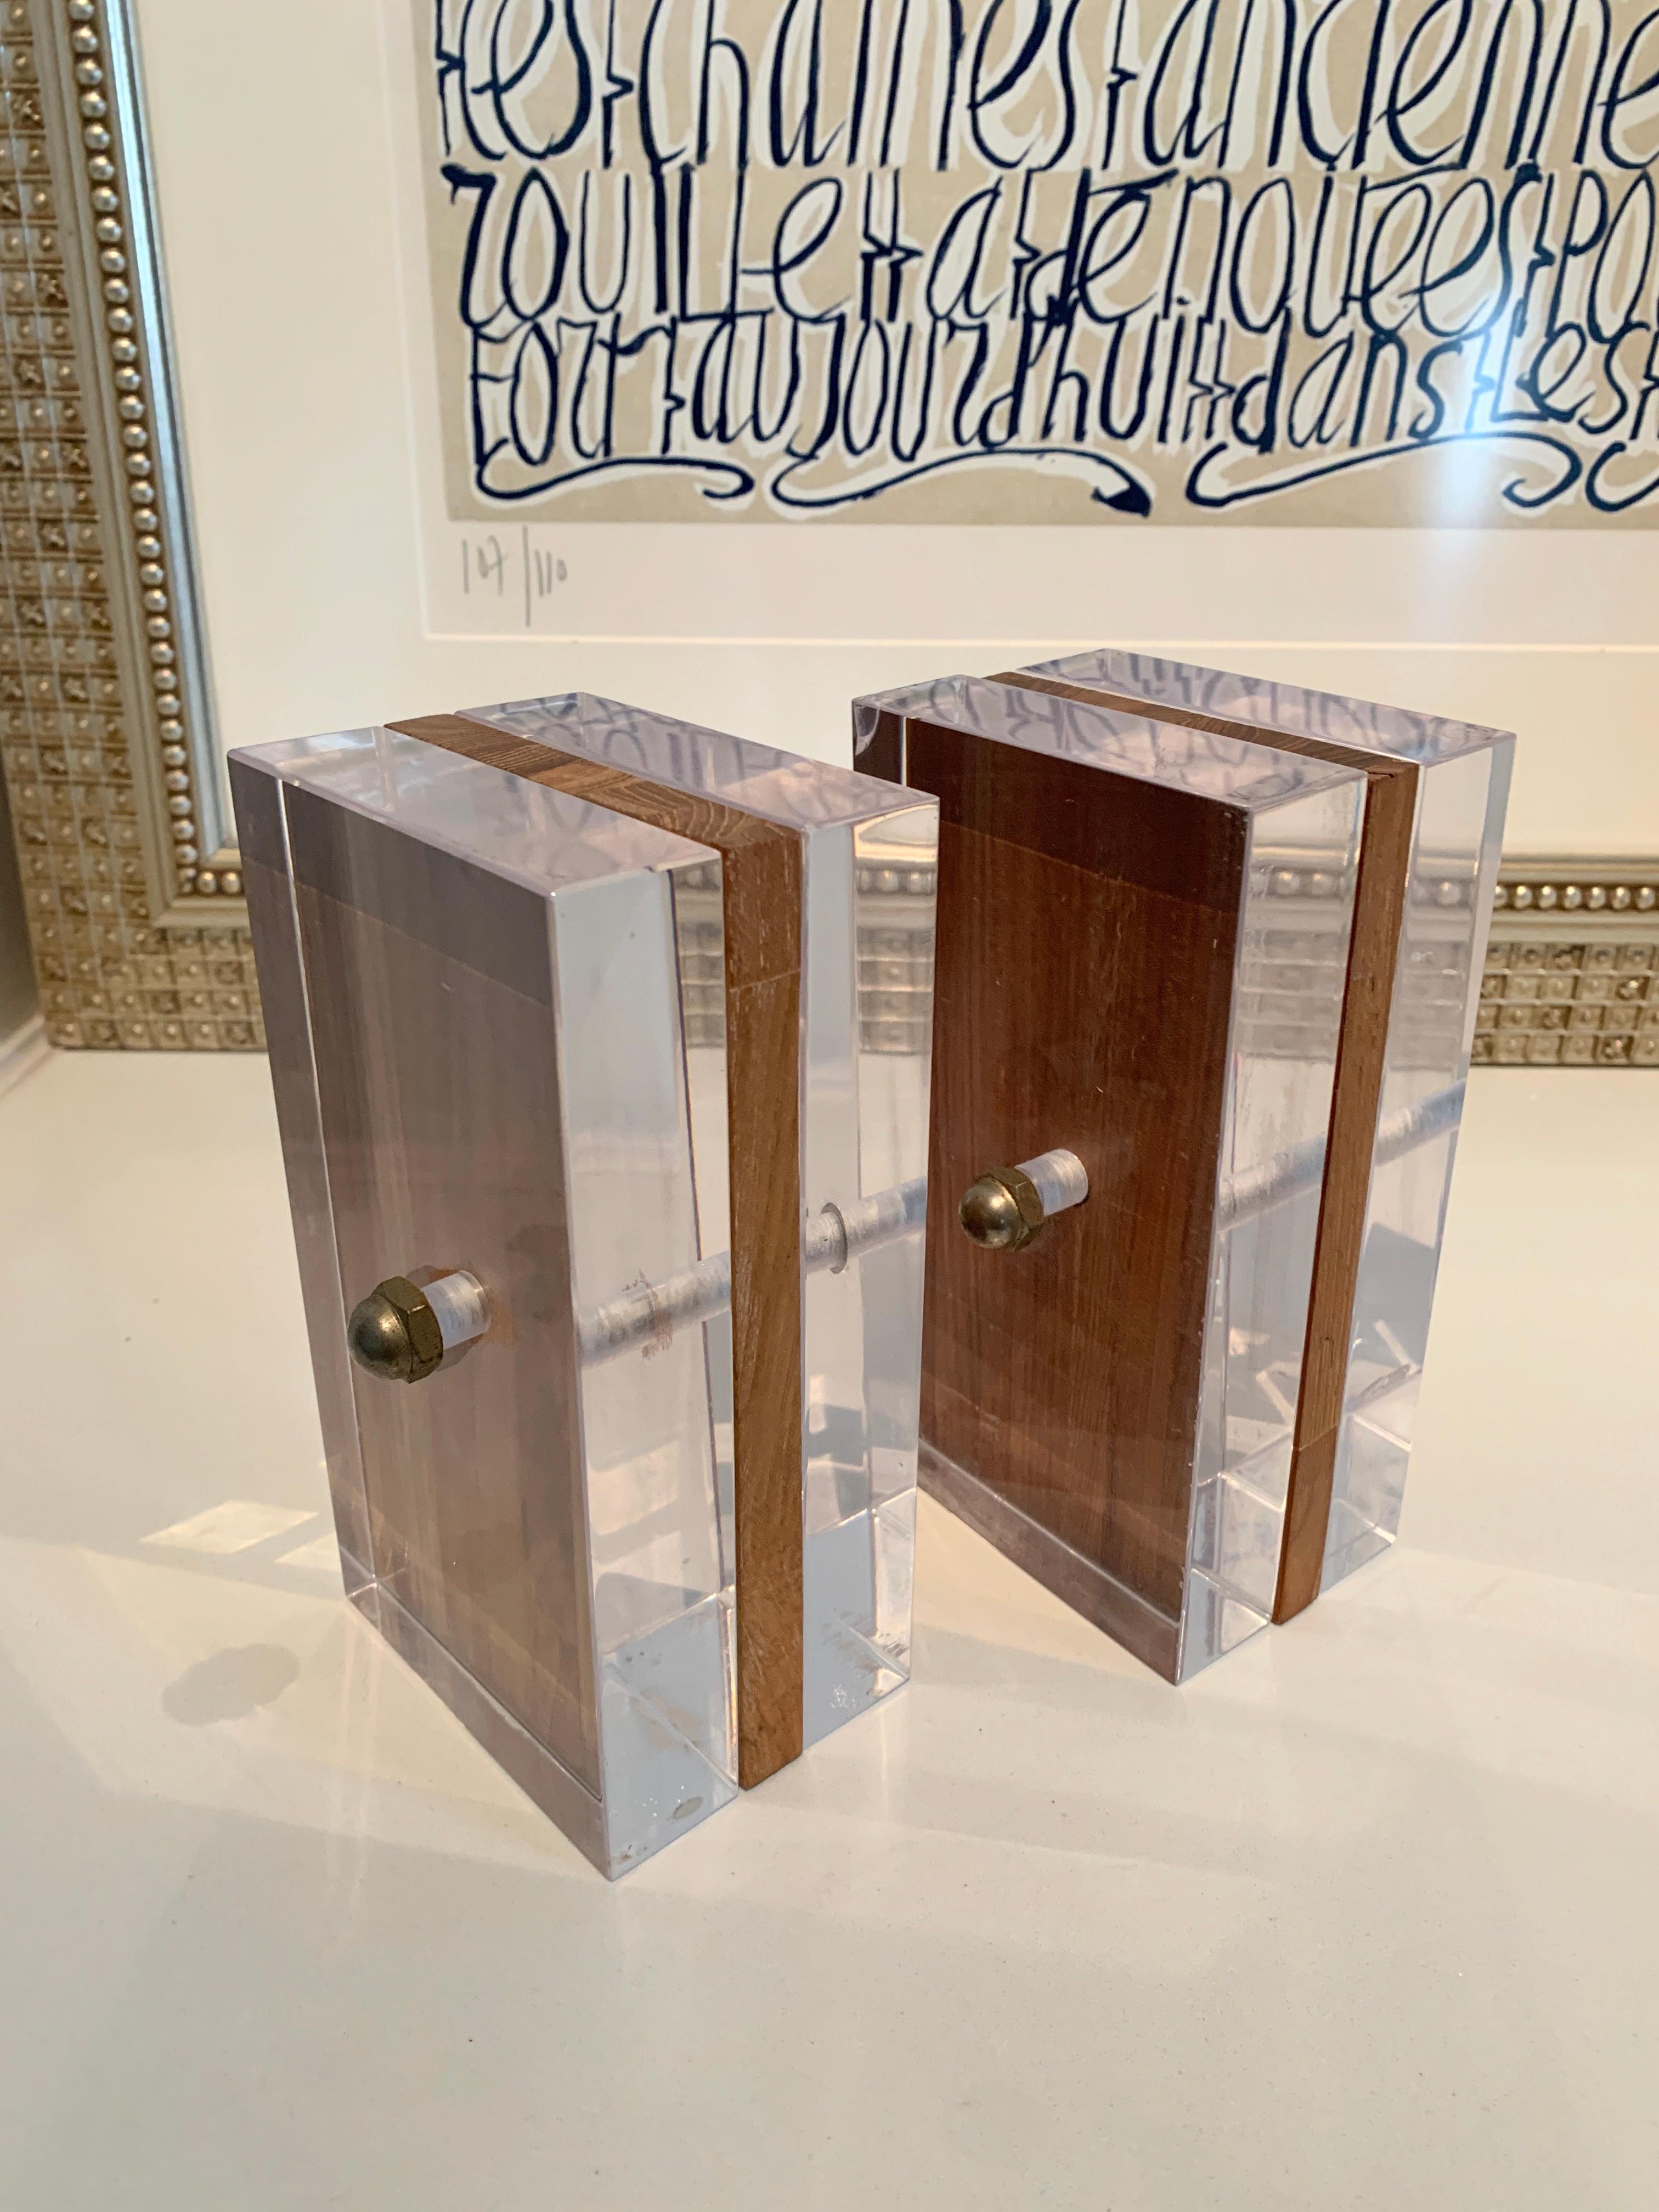 A versatile pair of Ritts for Astrolite Bookends. Whether your den or library is modern or in a paneled room, this pair has you covered. The bolts on either side add an industrial touch. Made by the Ritts Company. Renowned photographer, Herb Ritts